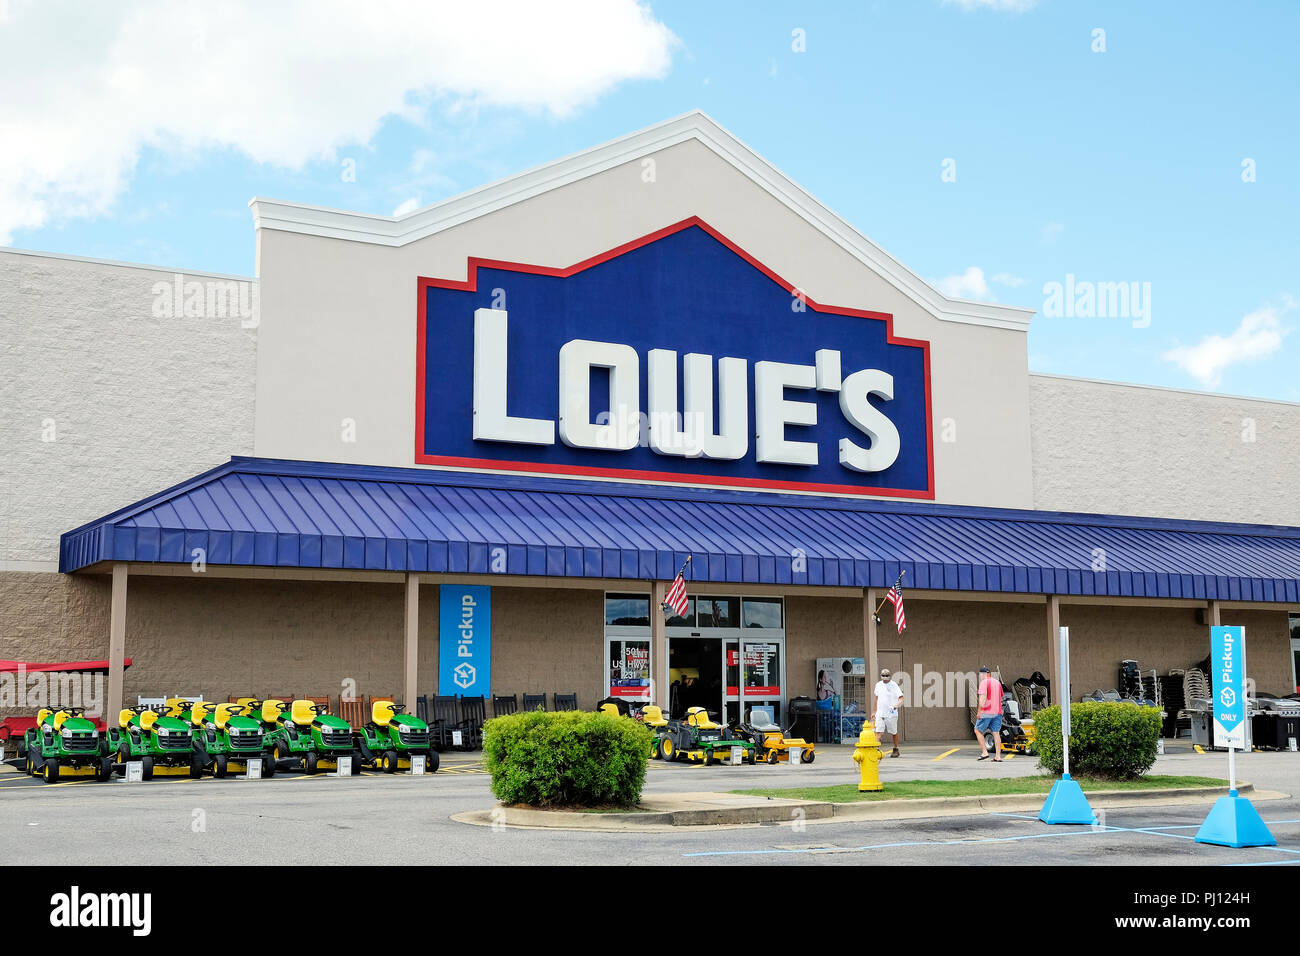 Lowe's home improvement and building supply store front exterior entrance showing logo sign in Montgomery Alabama, USA. Stock Photo